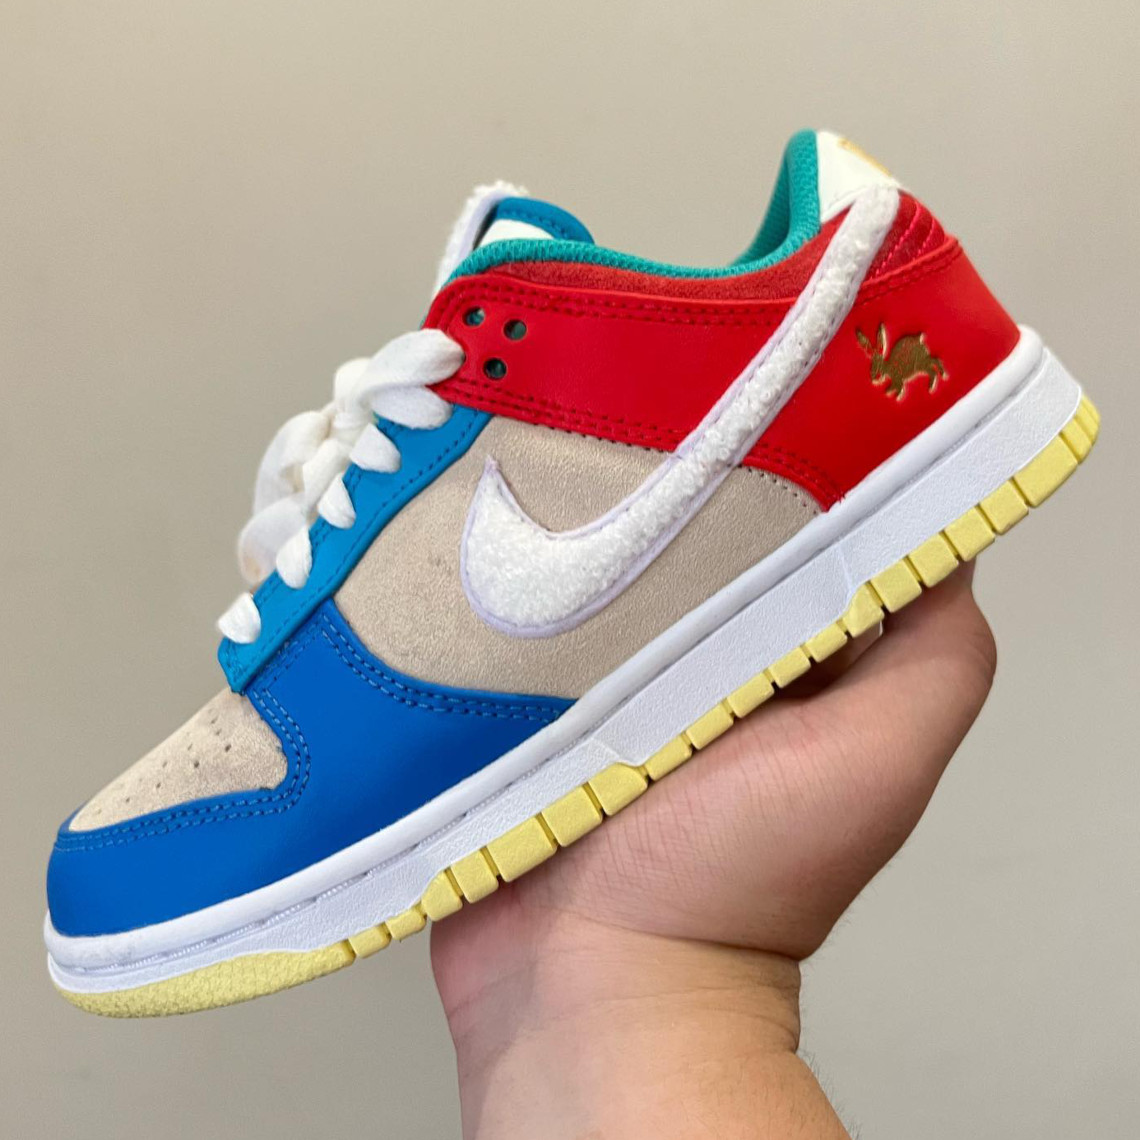 nike-27-5-dunk-chinese-new-year-street-hawker-by-god0721-s